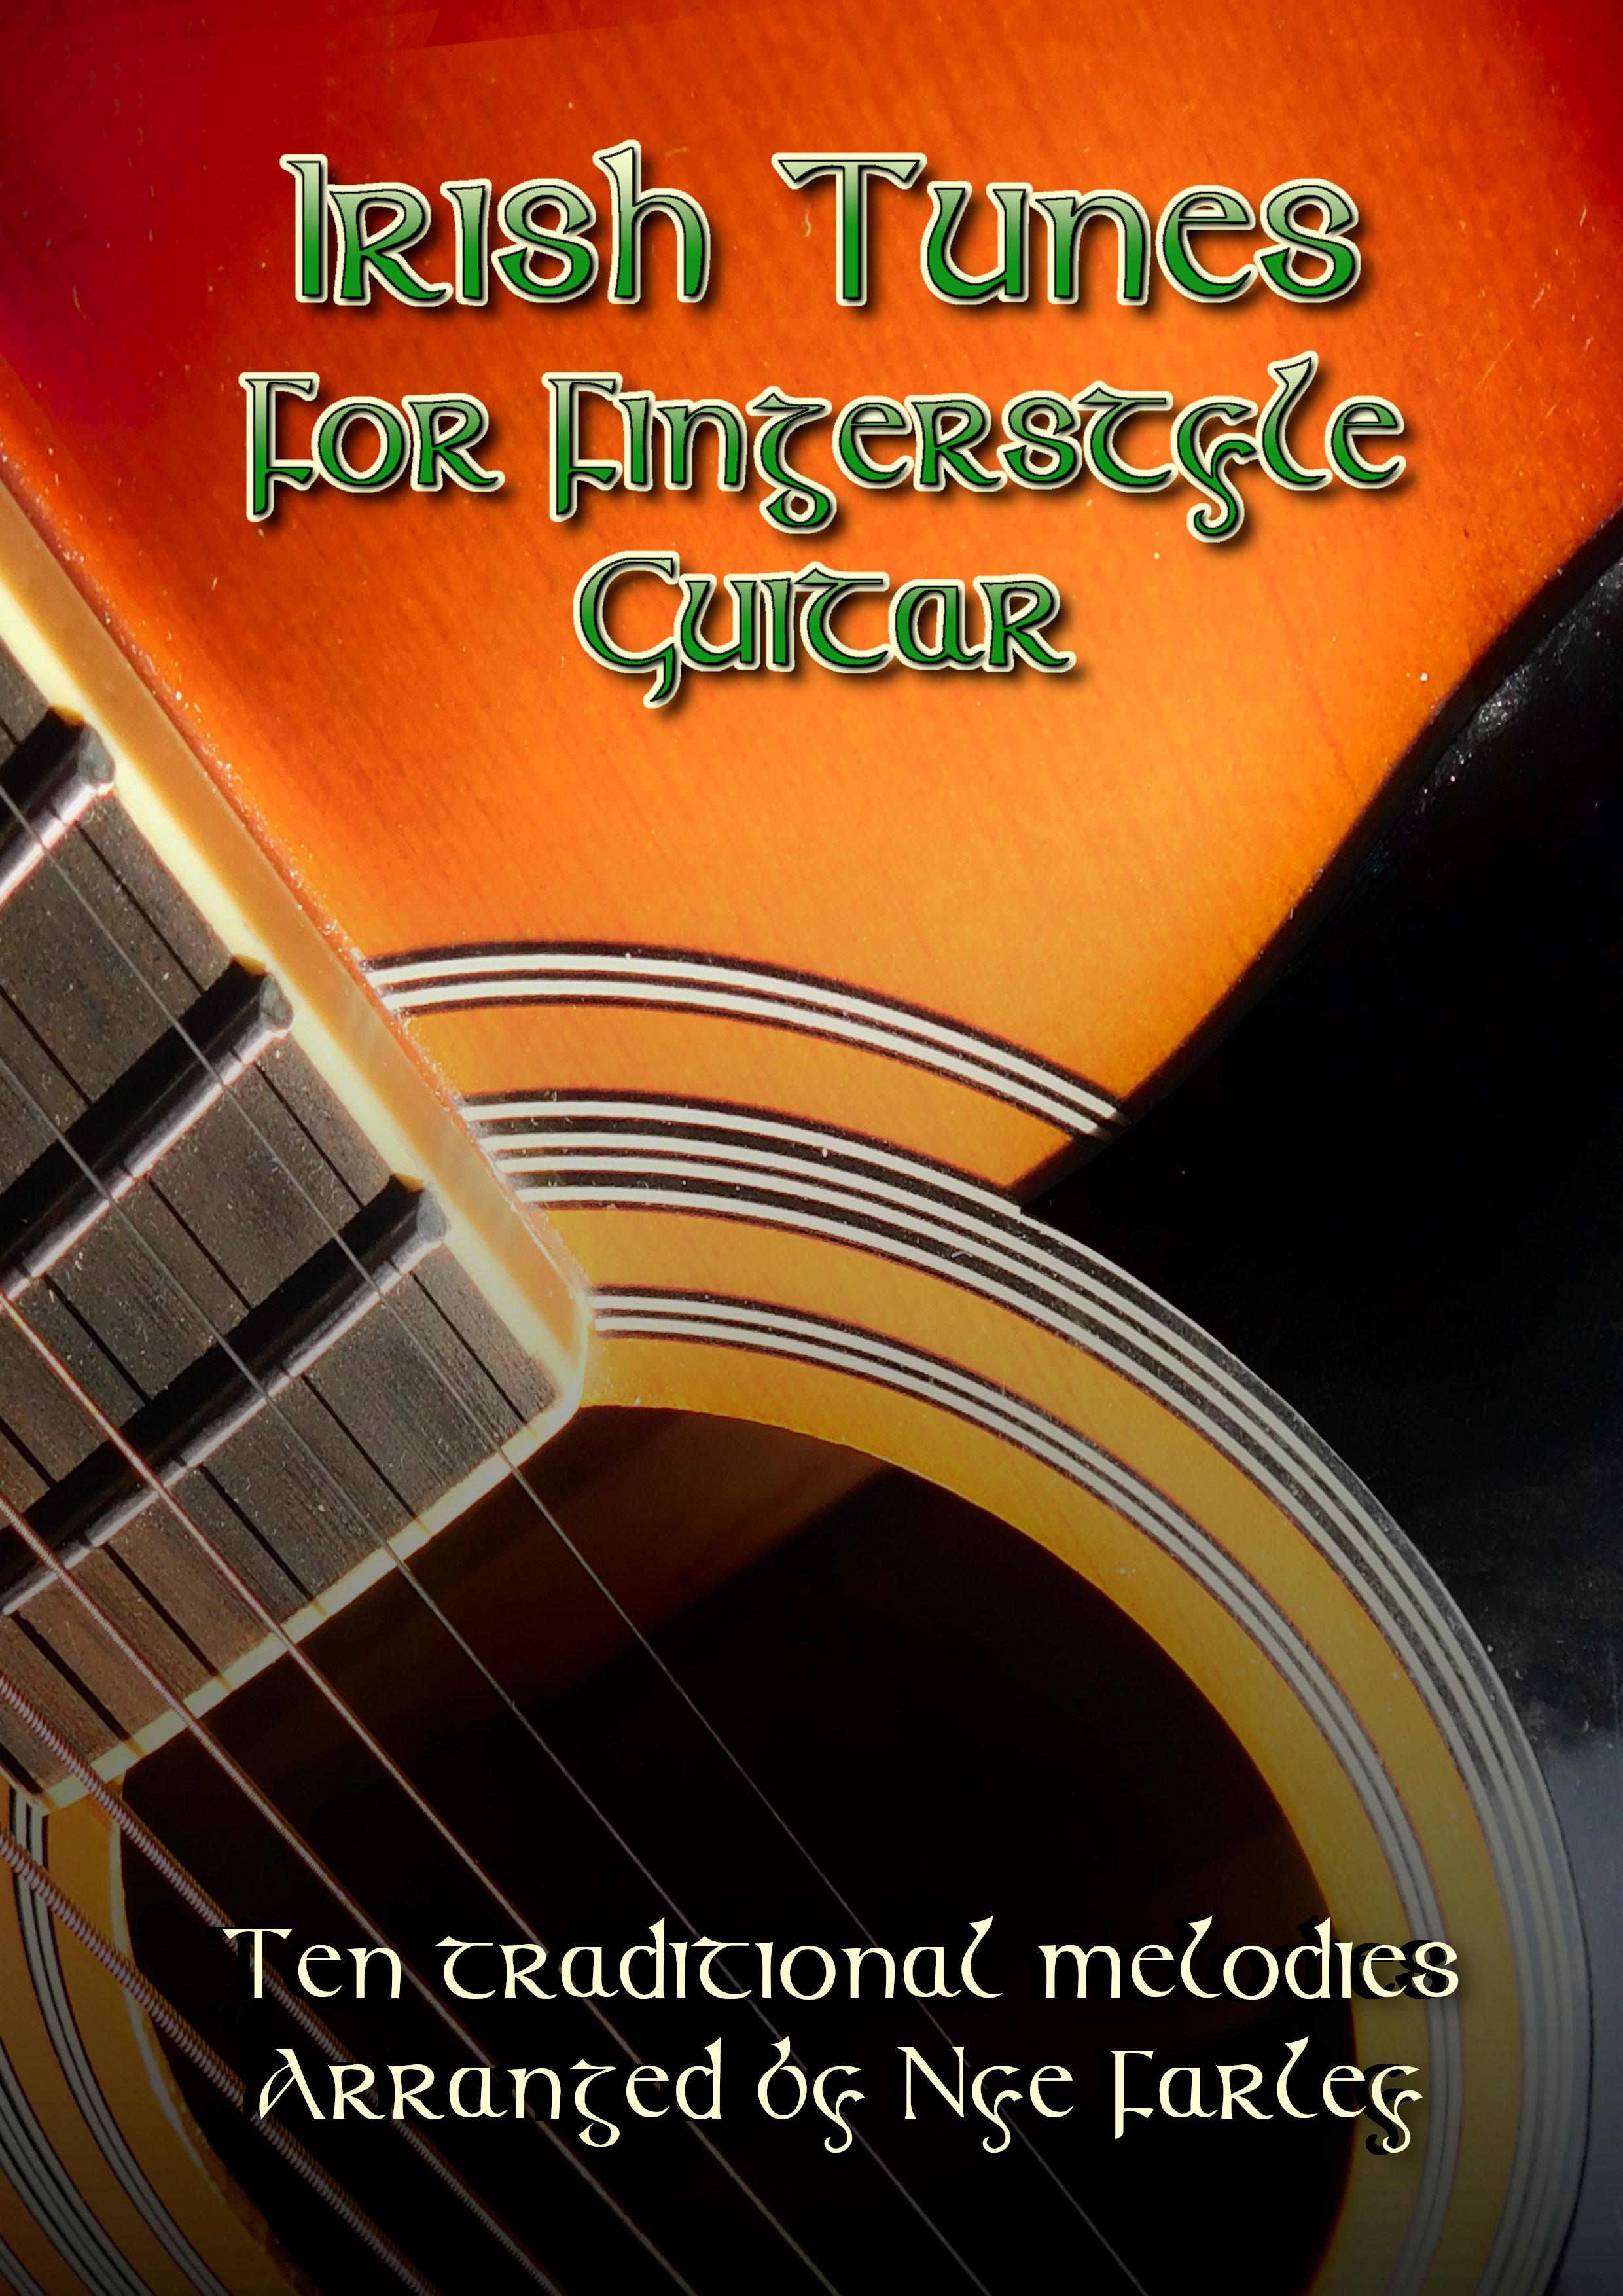 Irish Tunes For Fingerstyle Guitar- ten classic melodies arranged by Nye Farley